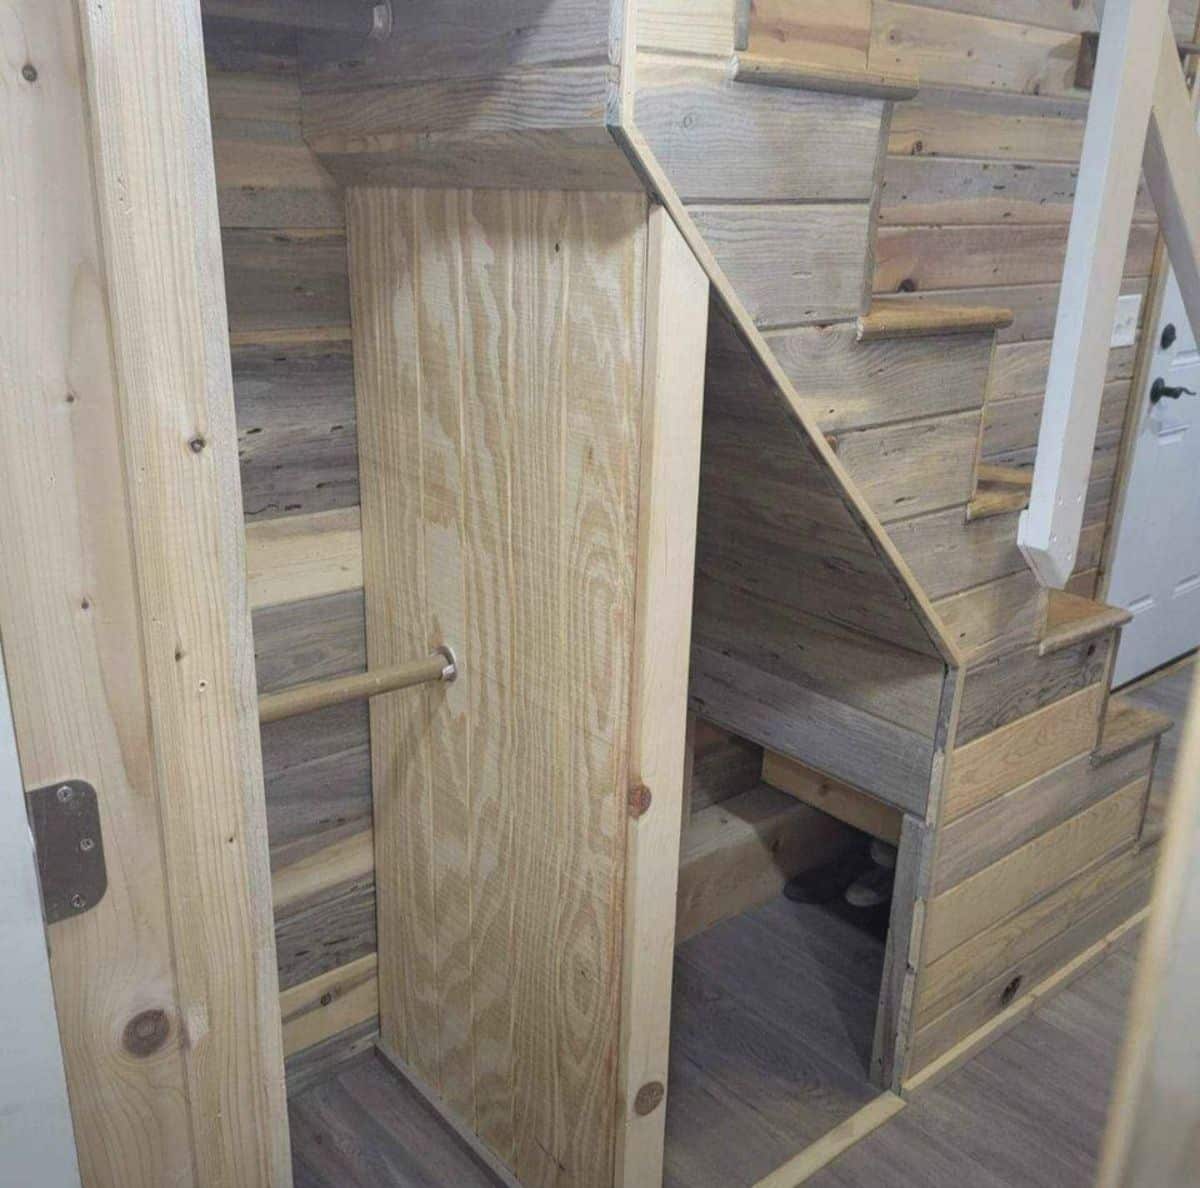 Storage space underneath the stairs